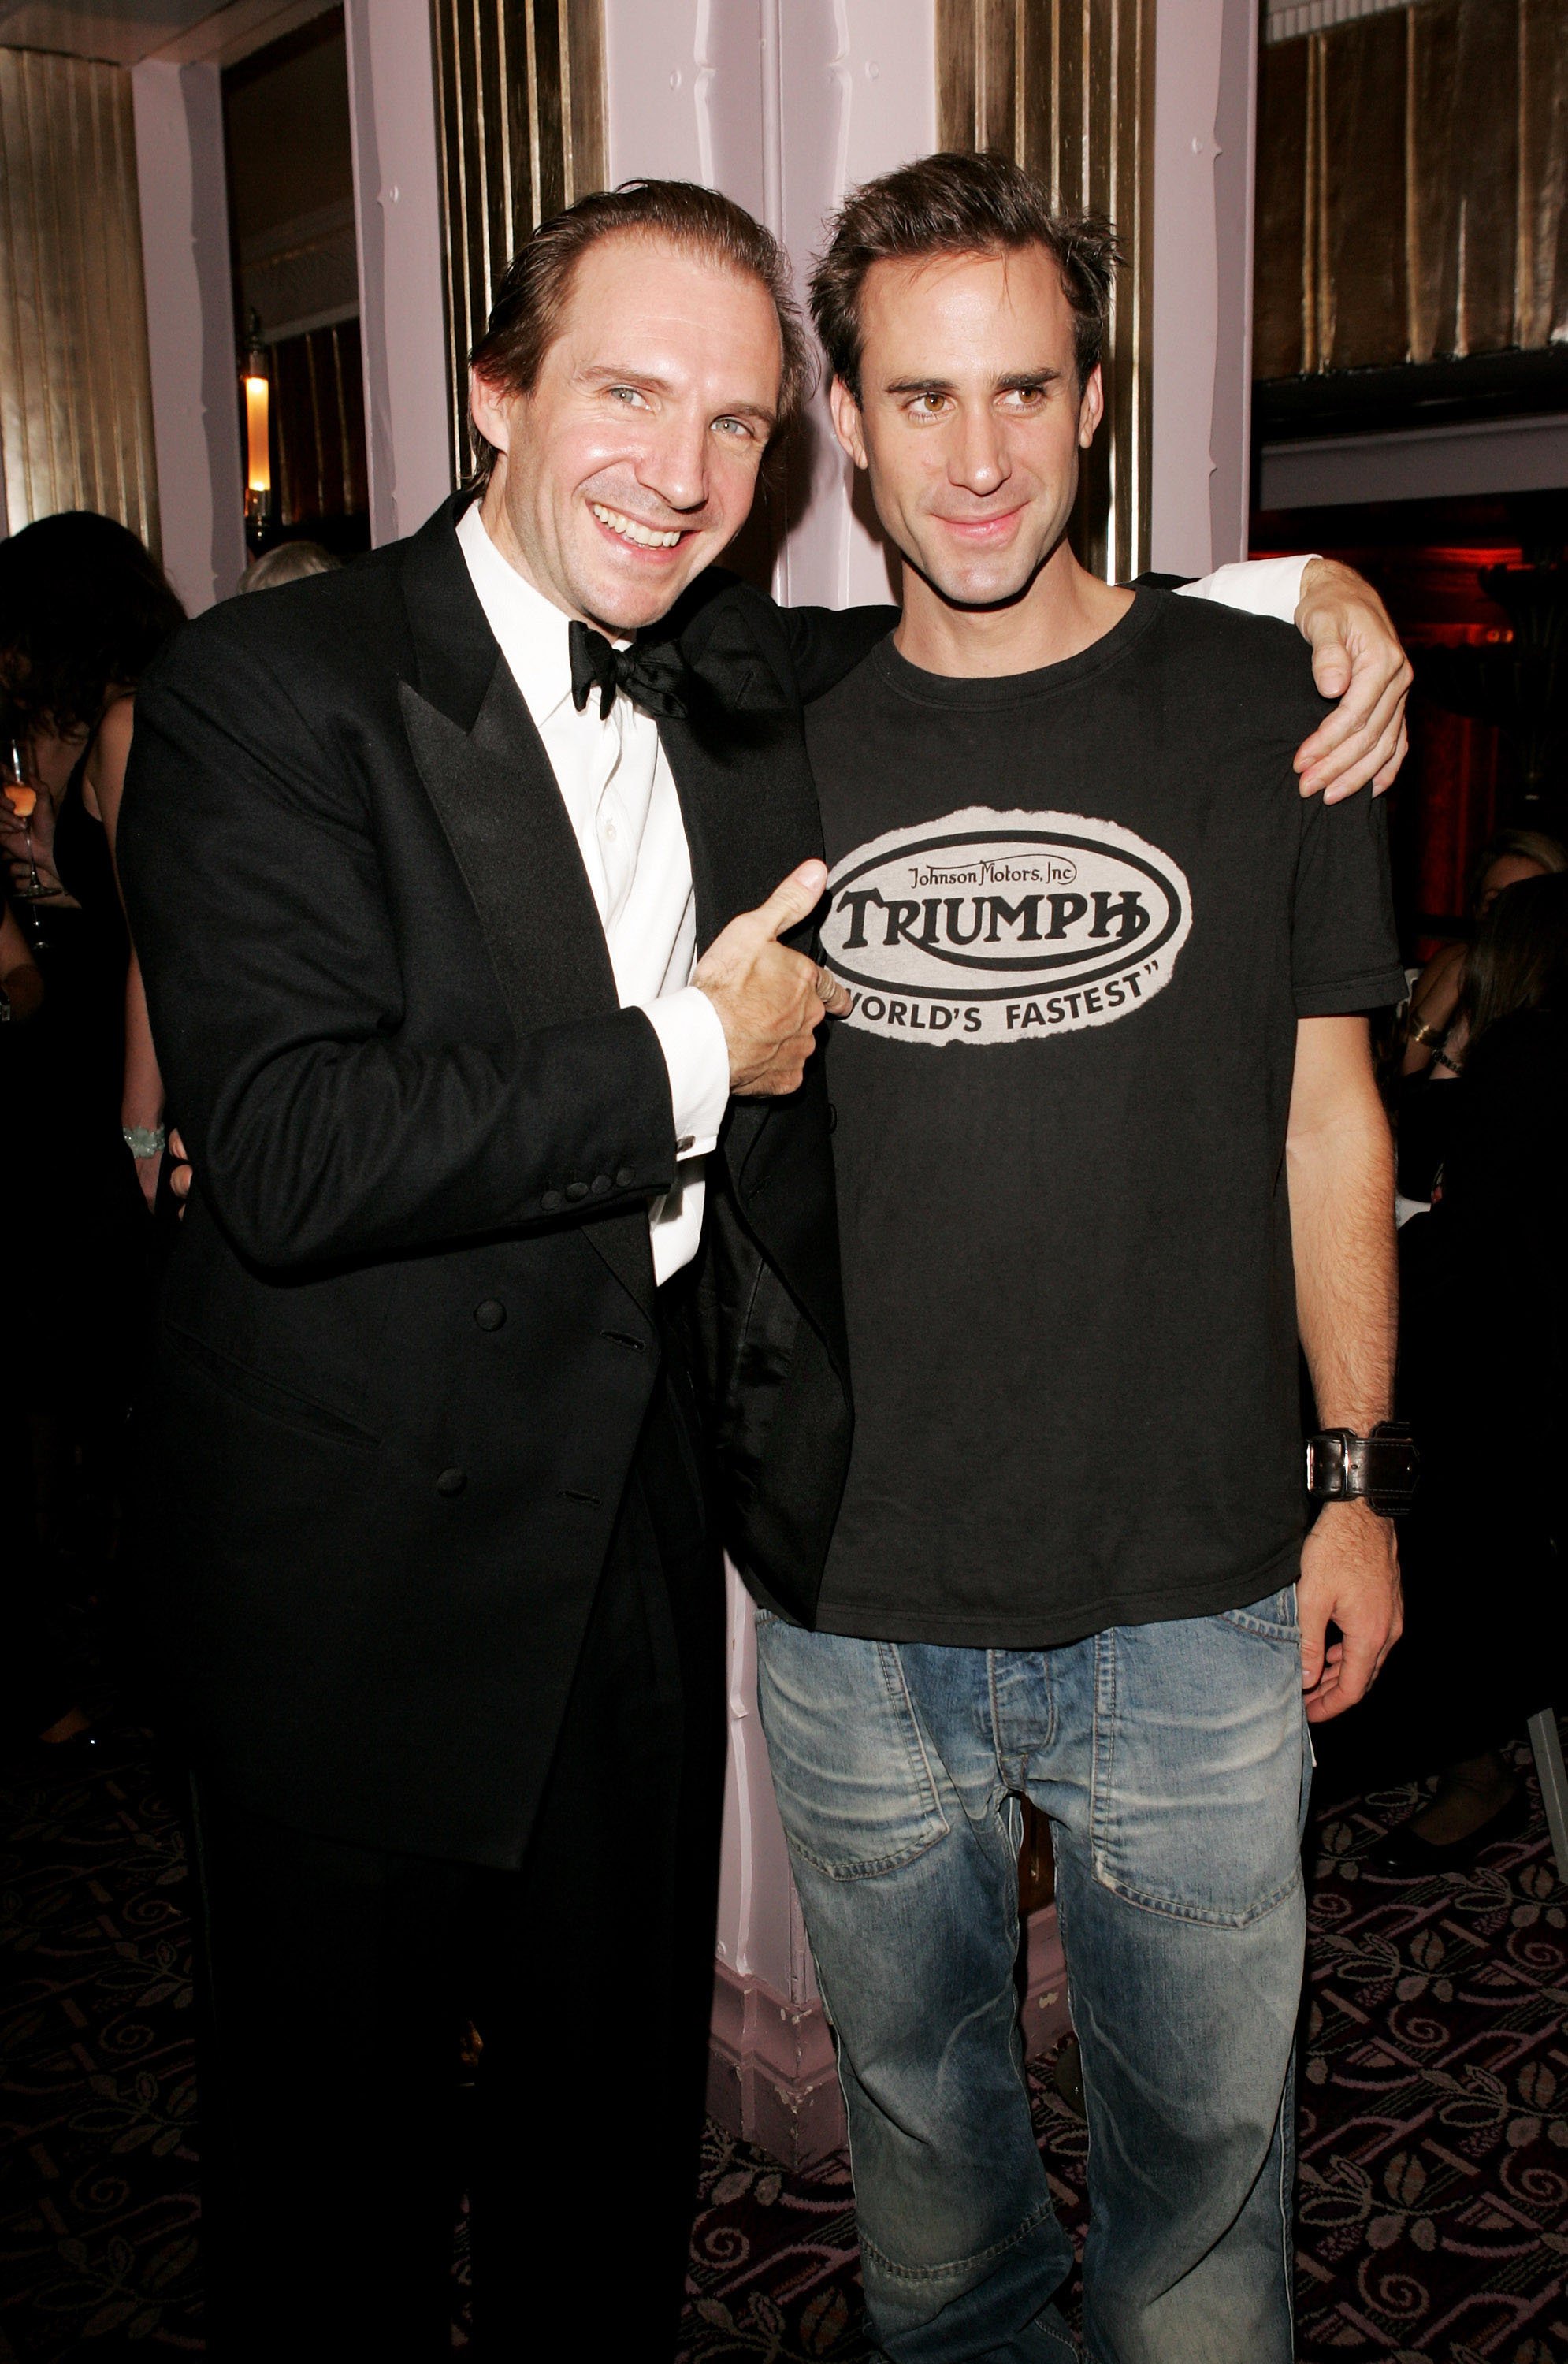 Ralph Fiennes and his brother Joseph Fiennes attend the aftershow party of "The Constant Gardener" Opening Gala at the Park Lane Hotel on October 19, 2005 , in London, England. | Source: Getty Images